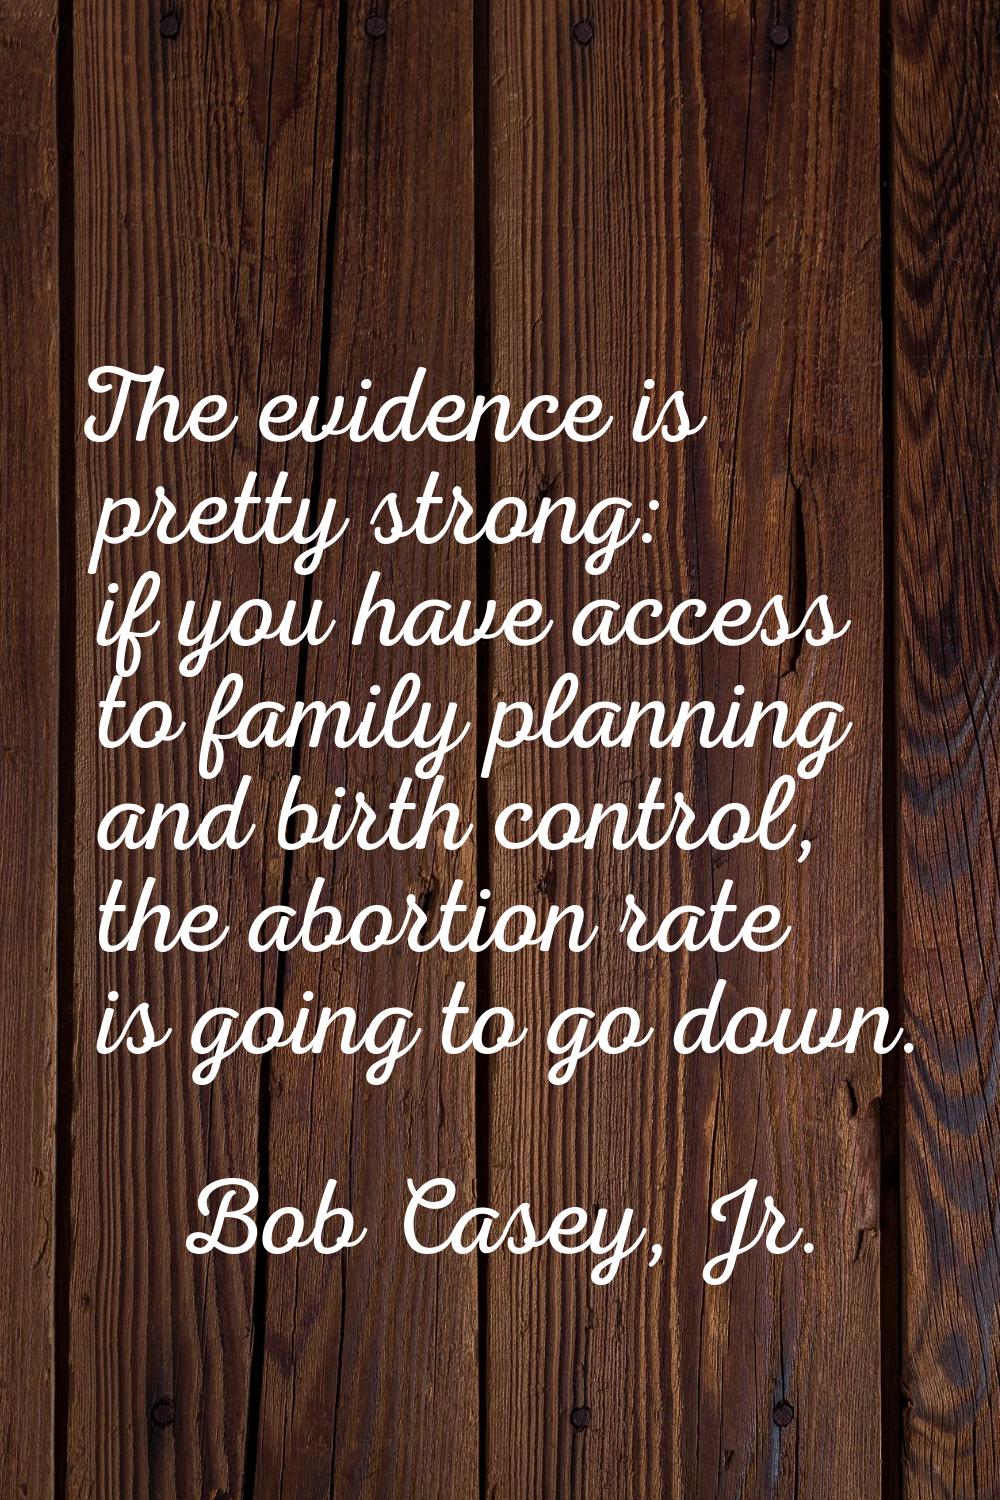 The evidence is pretty strong: if you have access to family planning and birth control, the abortio